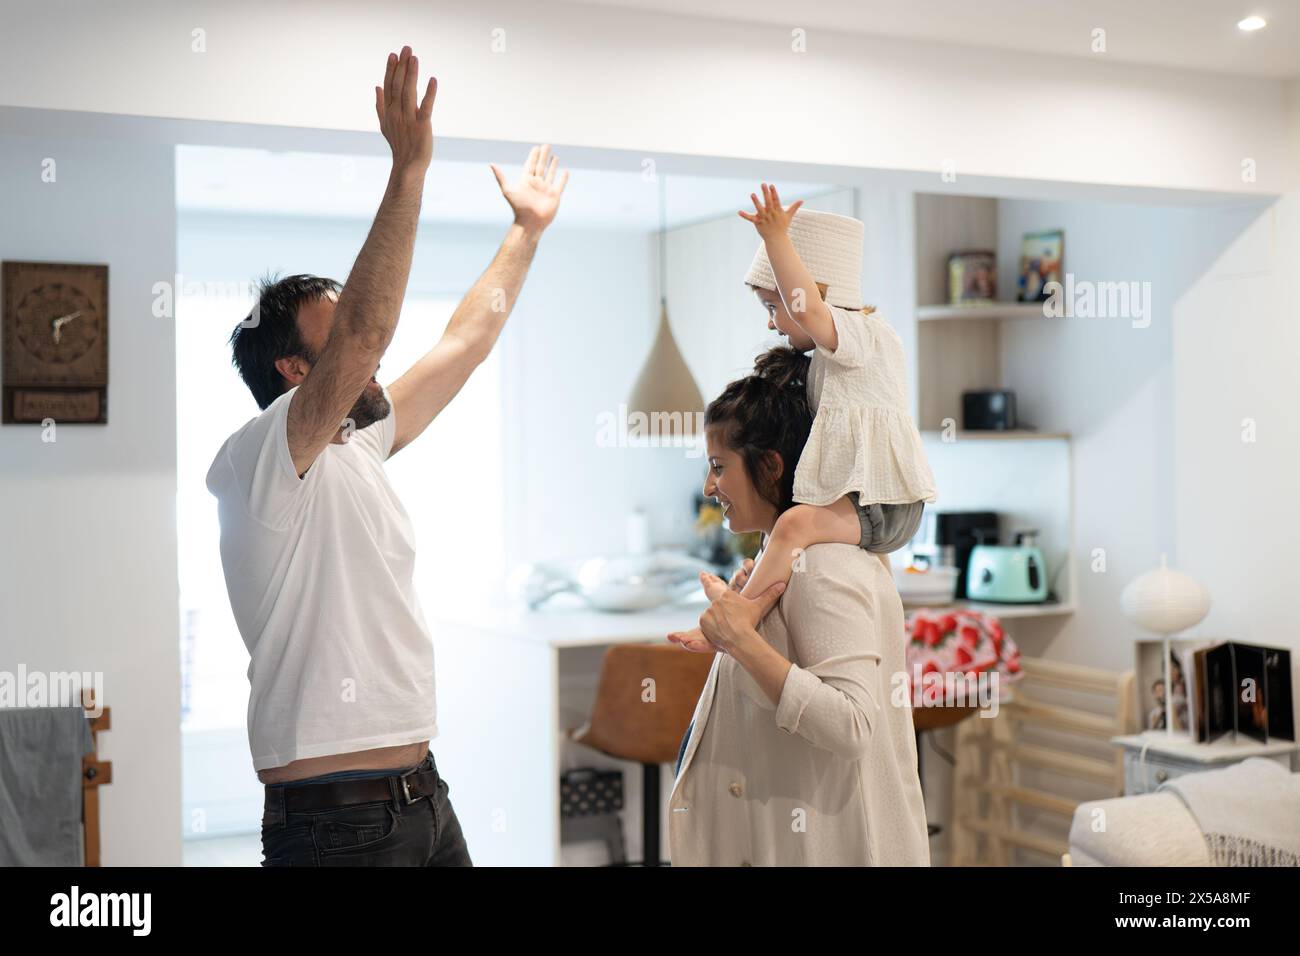 A young family enjoys a moment of play at home, with a child riding on his pregnant mothers shoulders and the father extending his hand in a gesture o Stock Photo